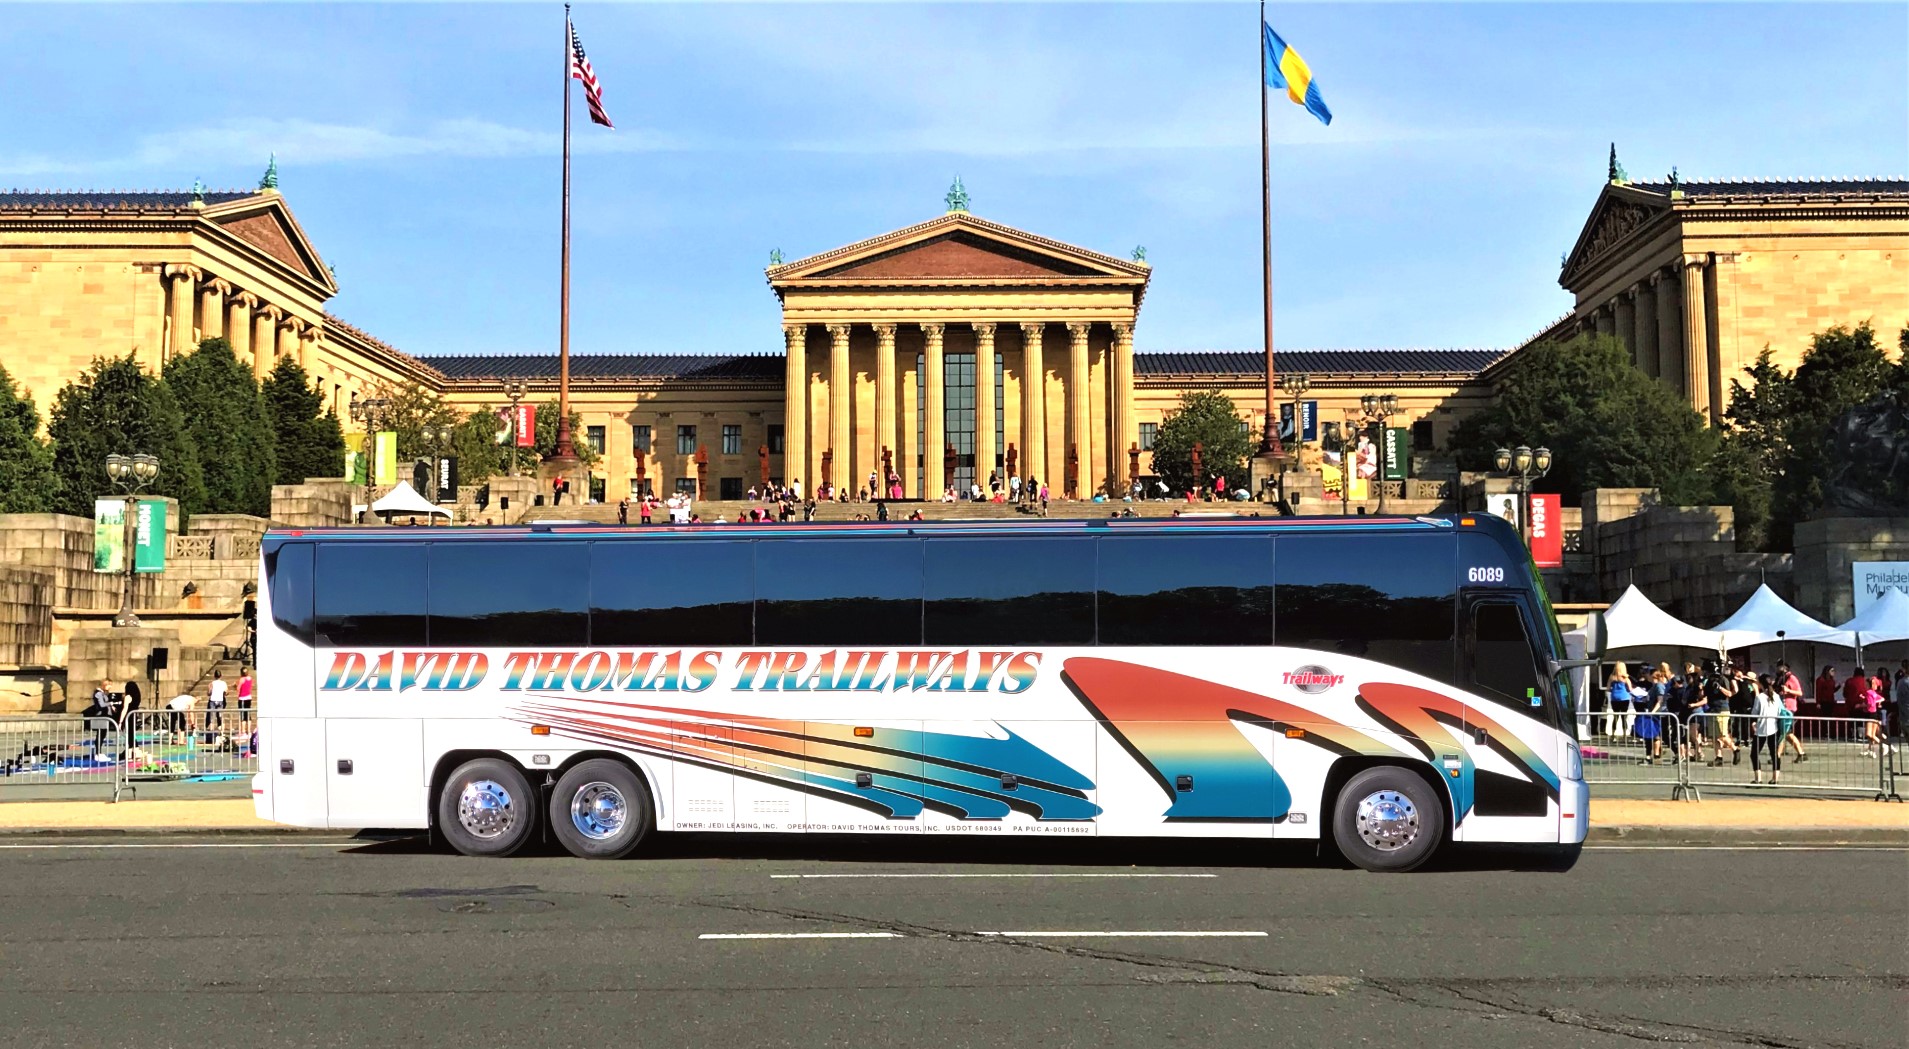 thomas tours and travel services